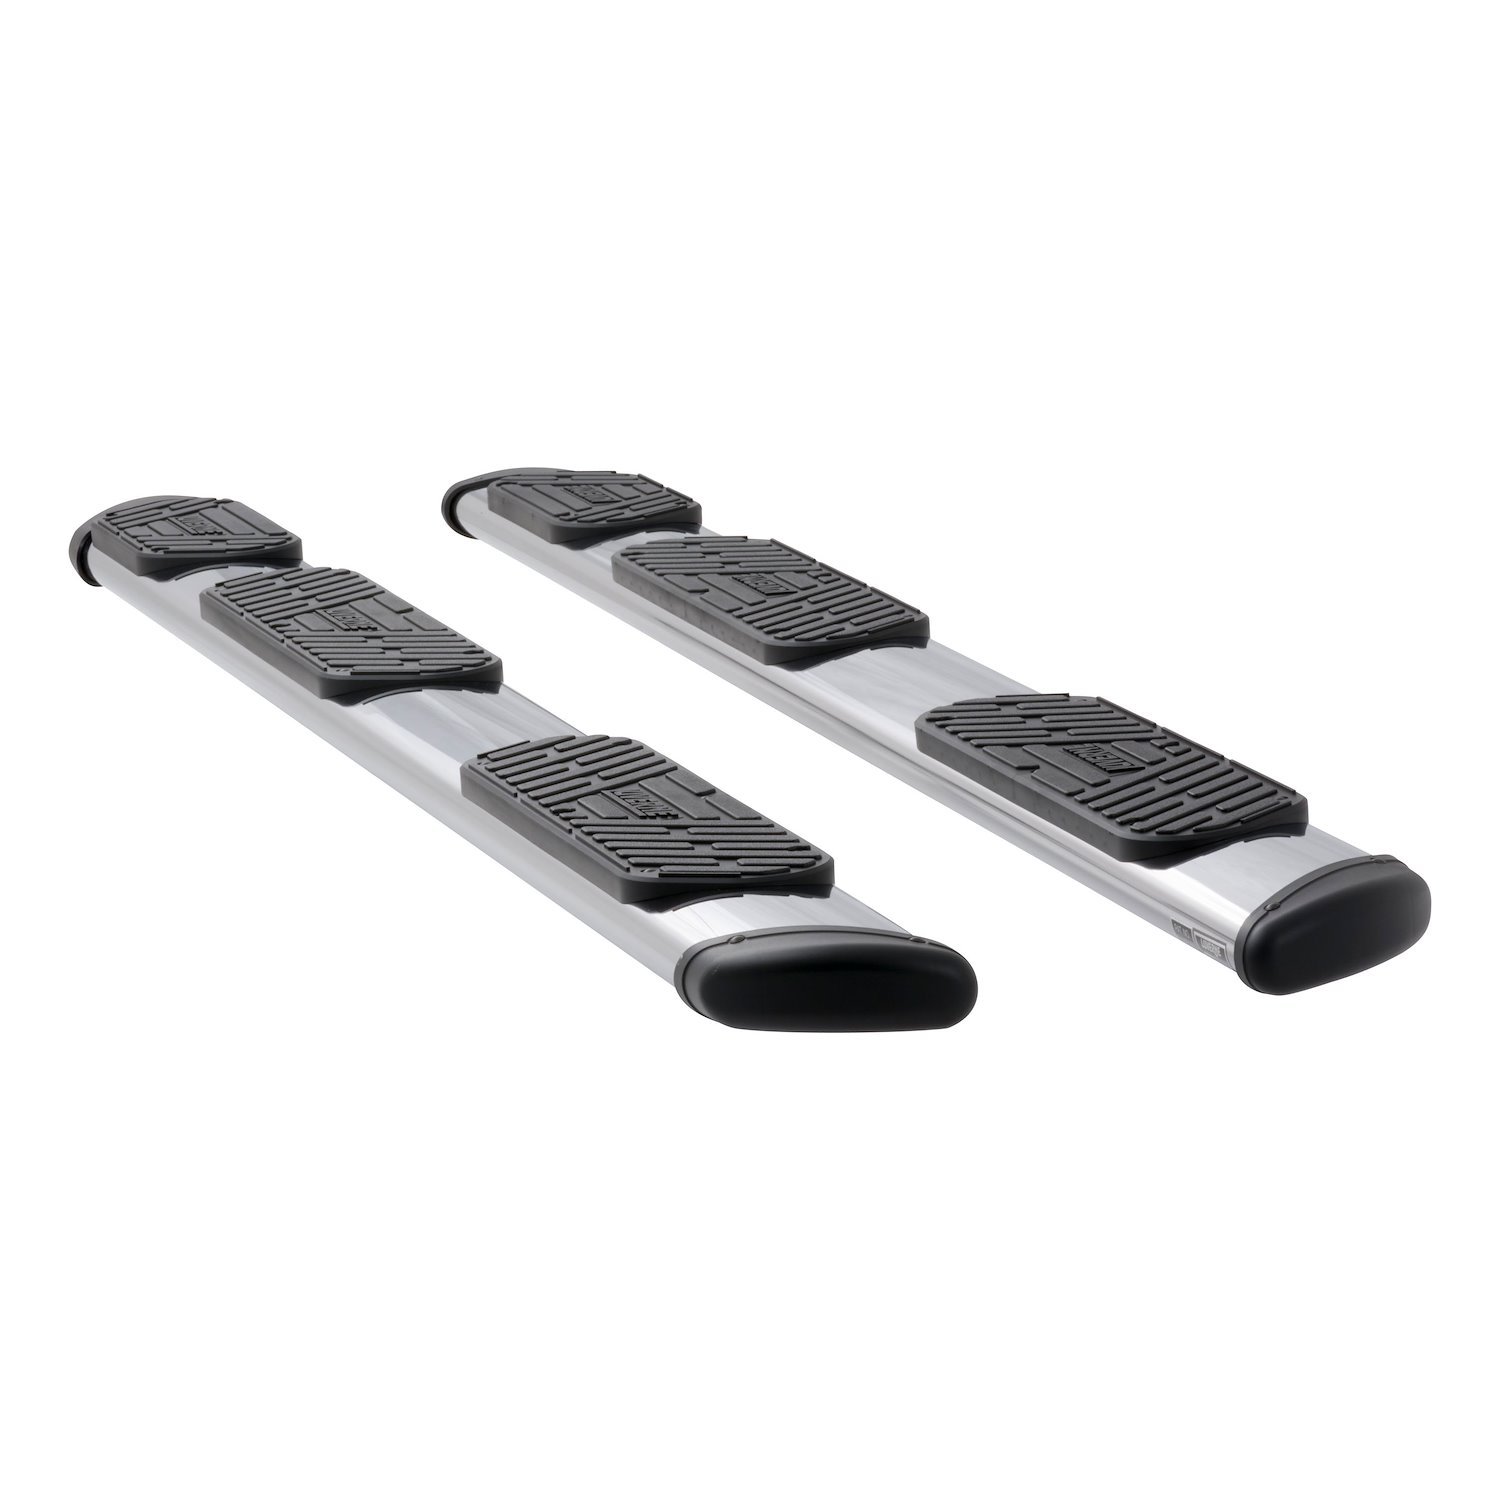 477102-400938 Regal 7 Polished Stainless 102 in. Oval W2W Steps Fits Select Dodge, Ram 1500